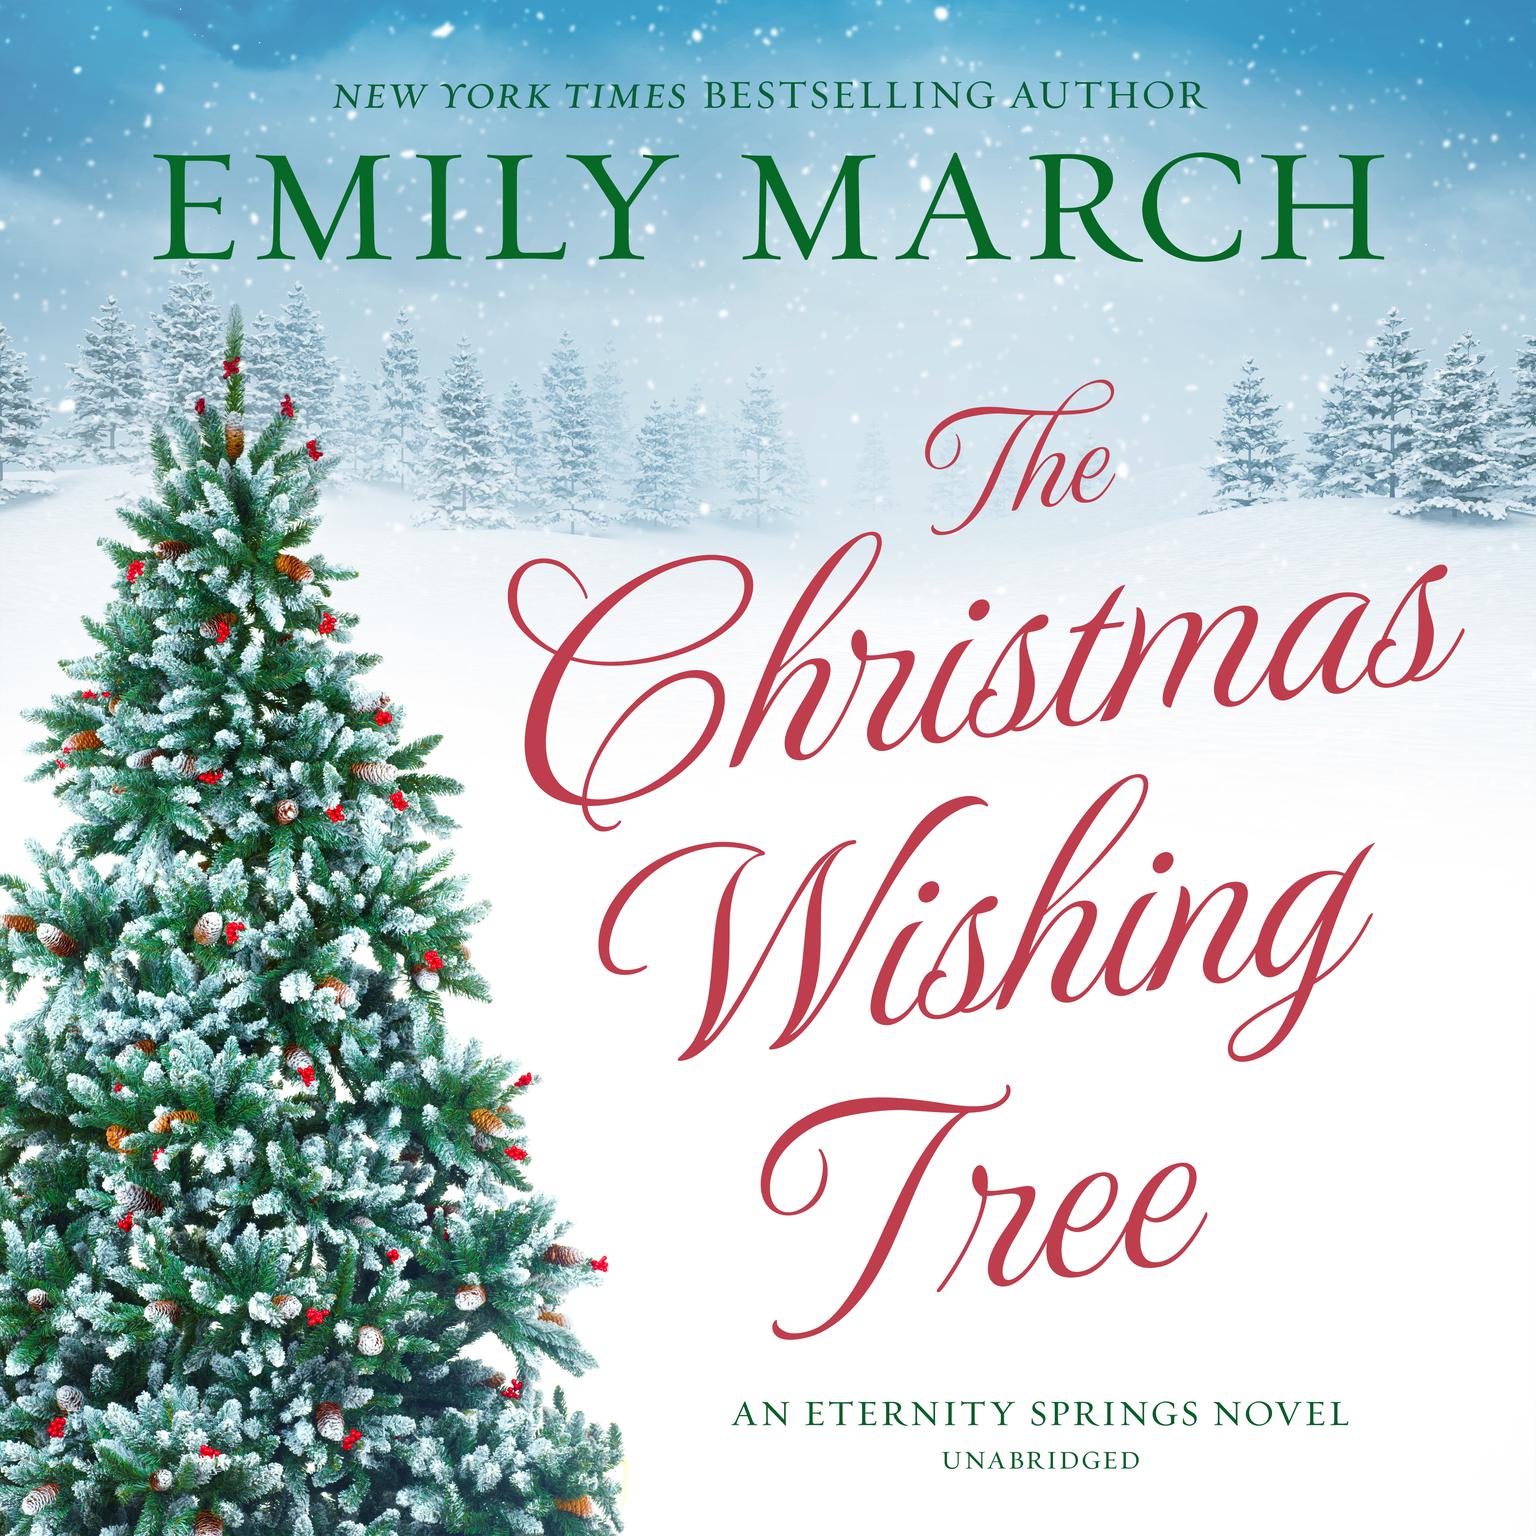 The Christmas Wishing Tree Audiobook, by Emily March